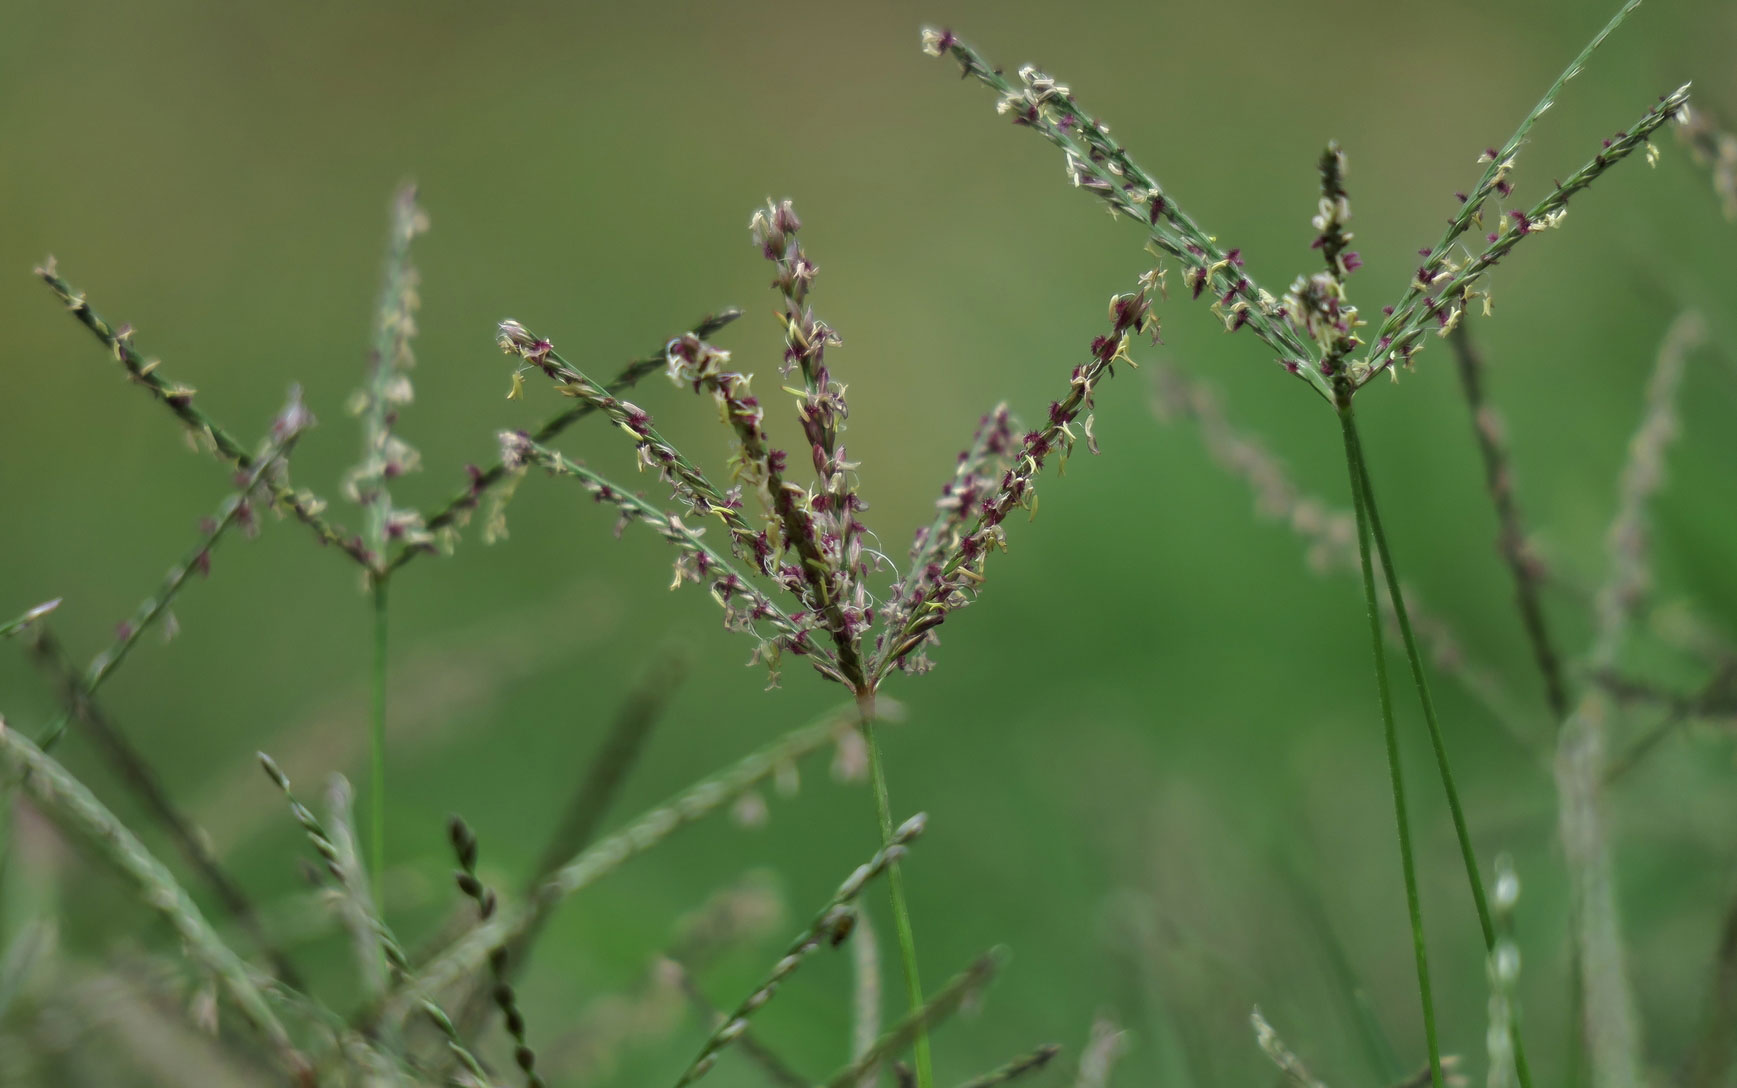 Photograph of inflorescences of Bermuda grass from South Africa. The photo shows several inflorescences that each consist of several (up to about six) branches radiating from a single point. The branches are purplish in color, with whitish stamens hanging from them.